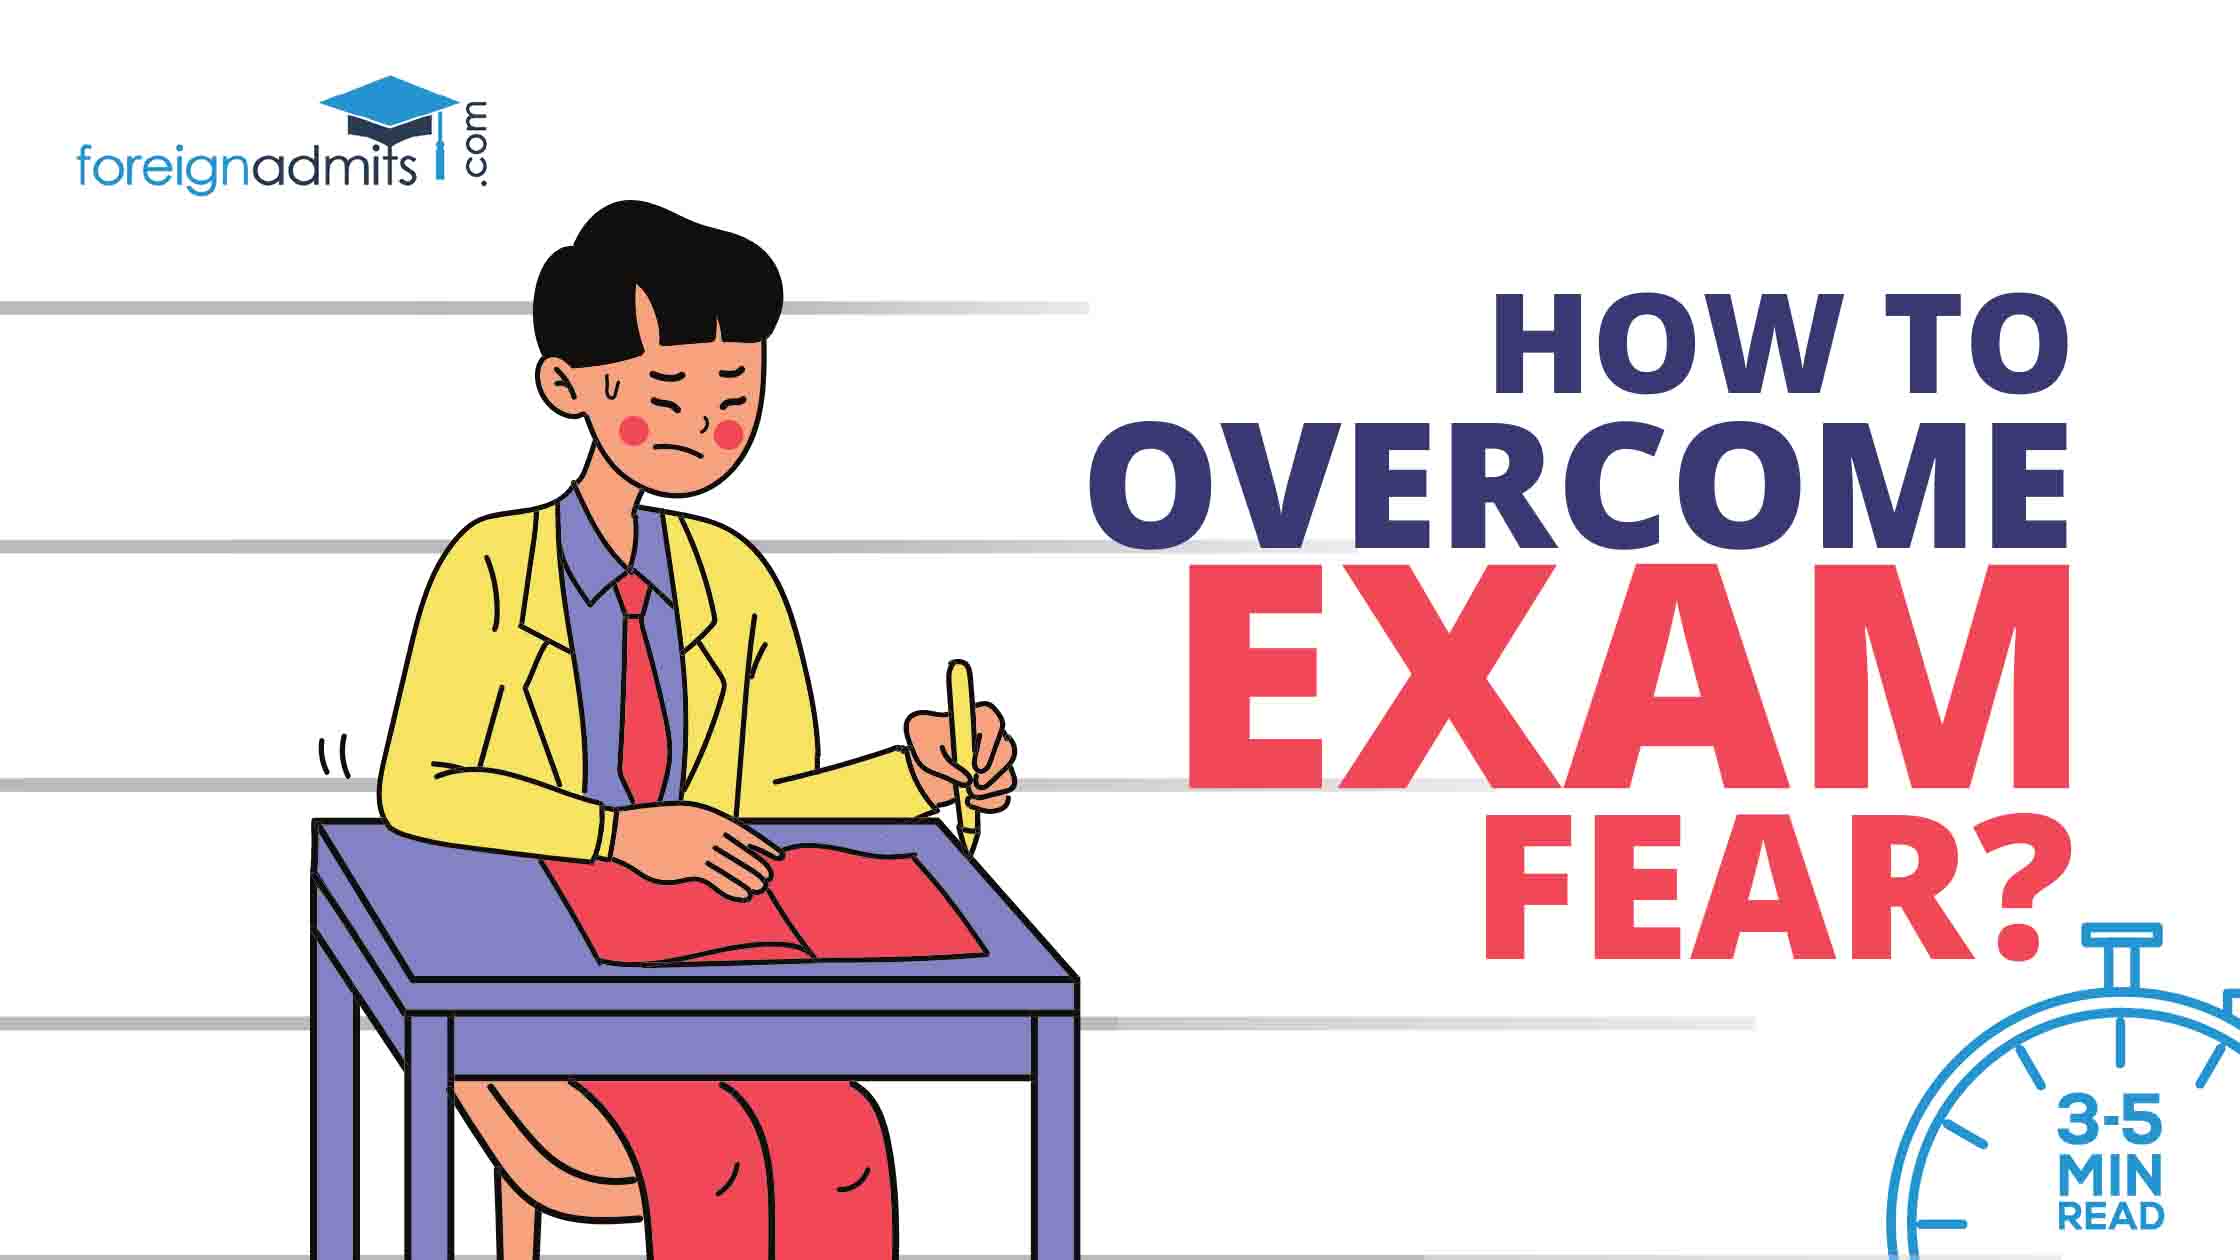 How to Overcome Exam Fear